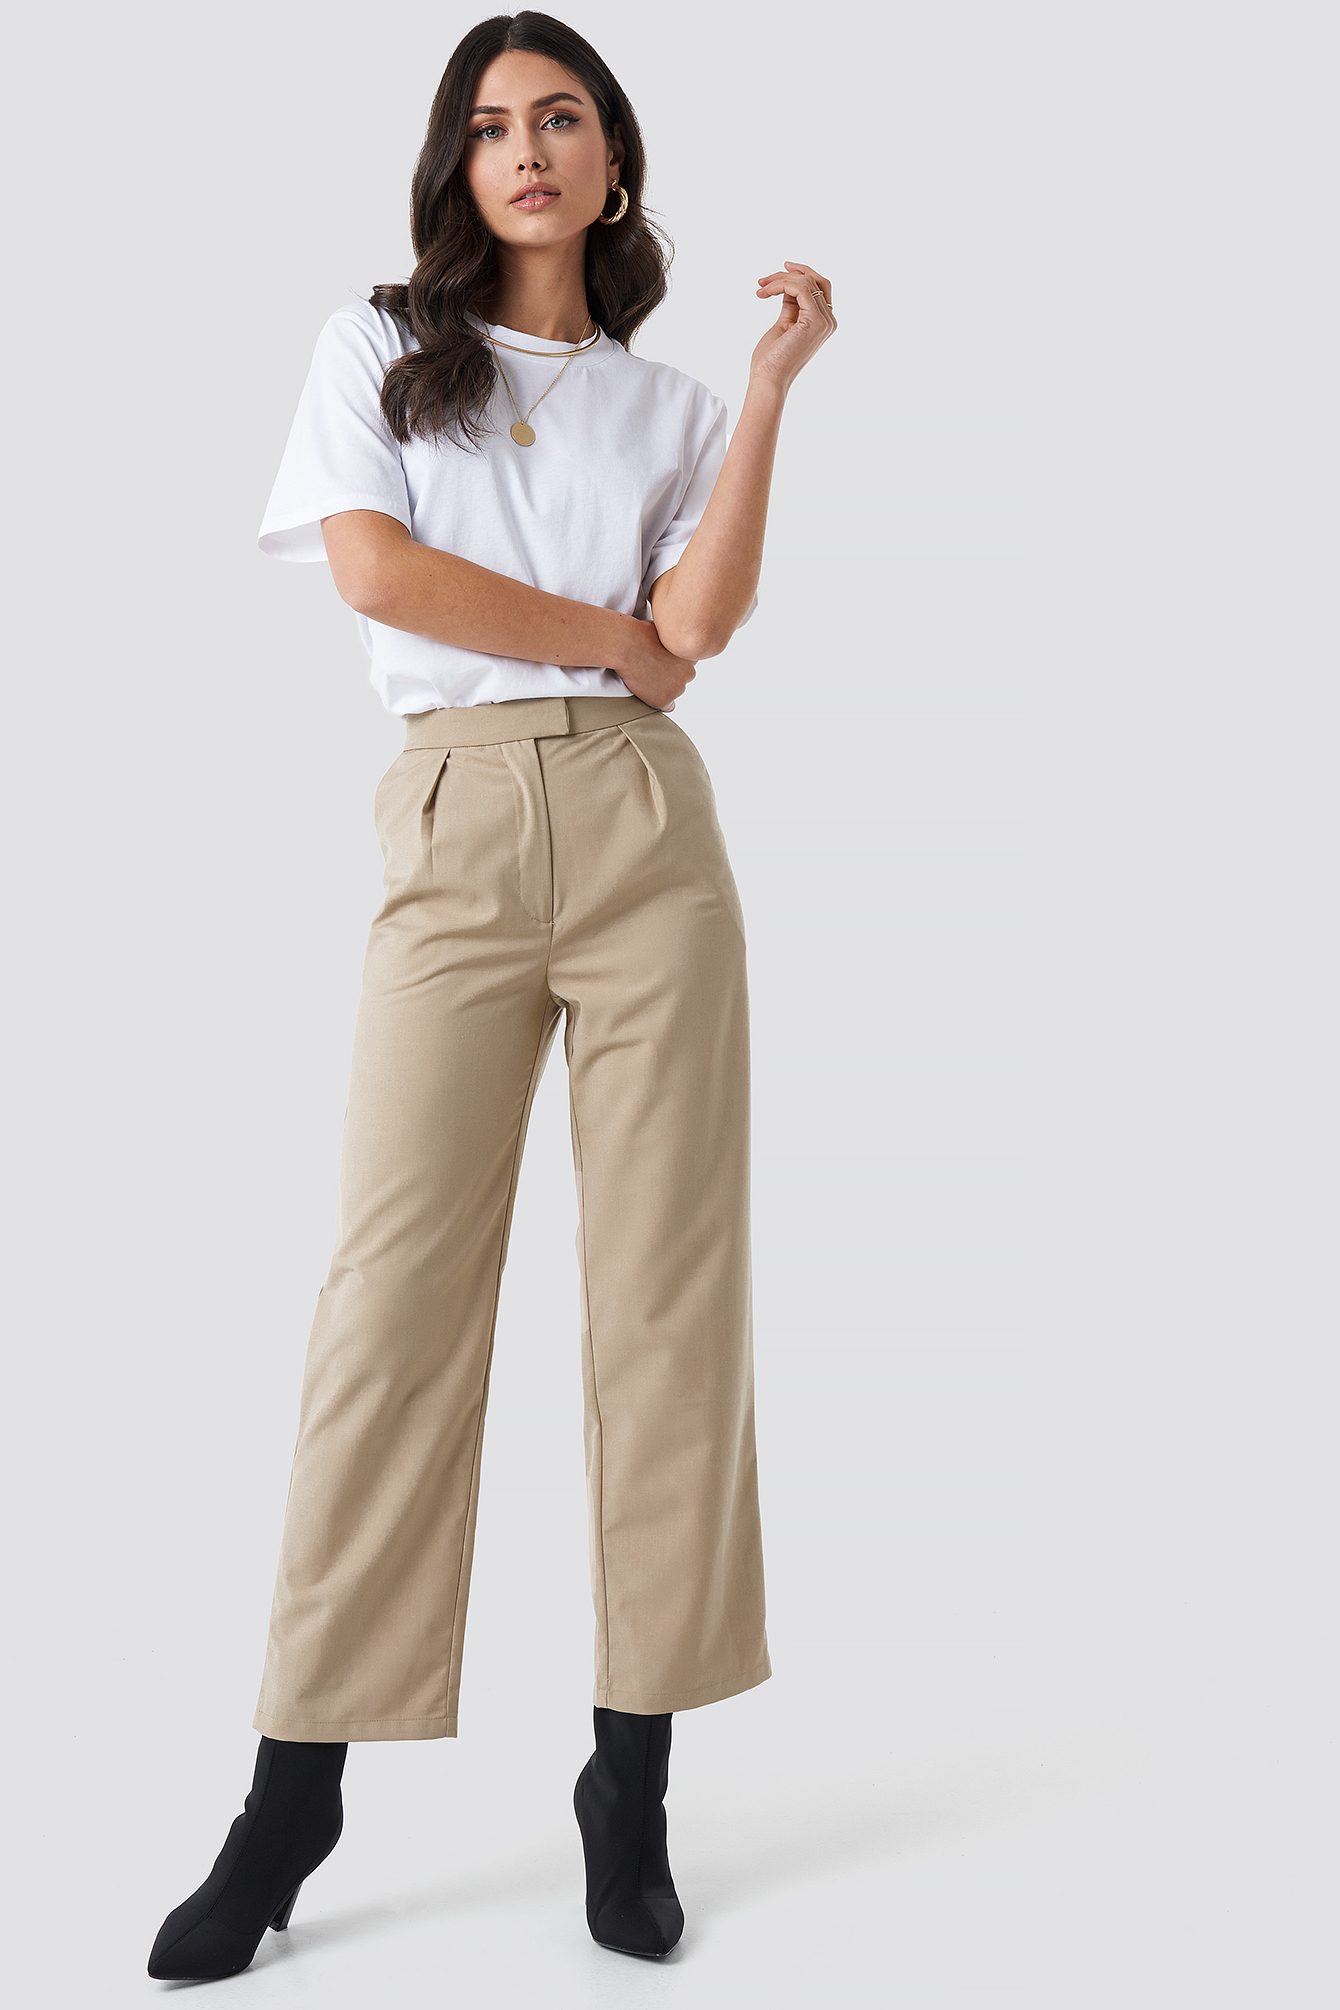 SheIn Women's Hight Waist Stretchy Palazzo Pants Wide Leg Flared Pants  Trousers Brown XS : Buy Online at Best Price in KSA - Souq is now  Amazon.sa: Fashion